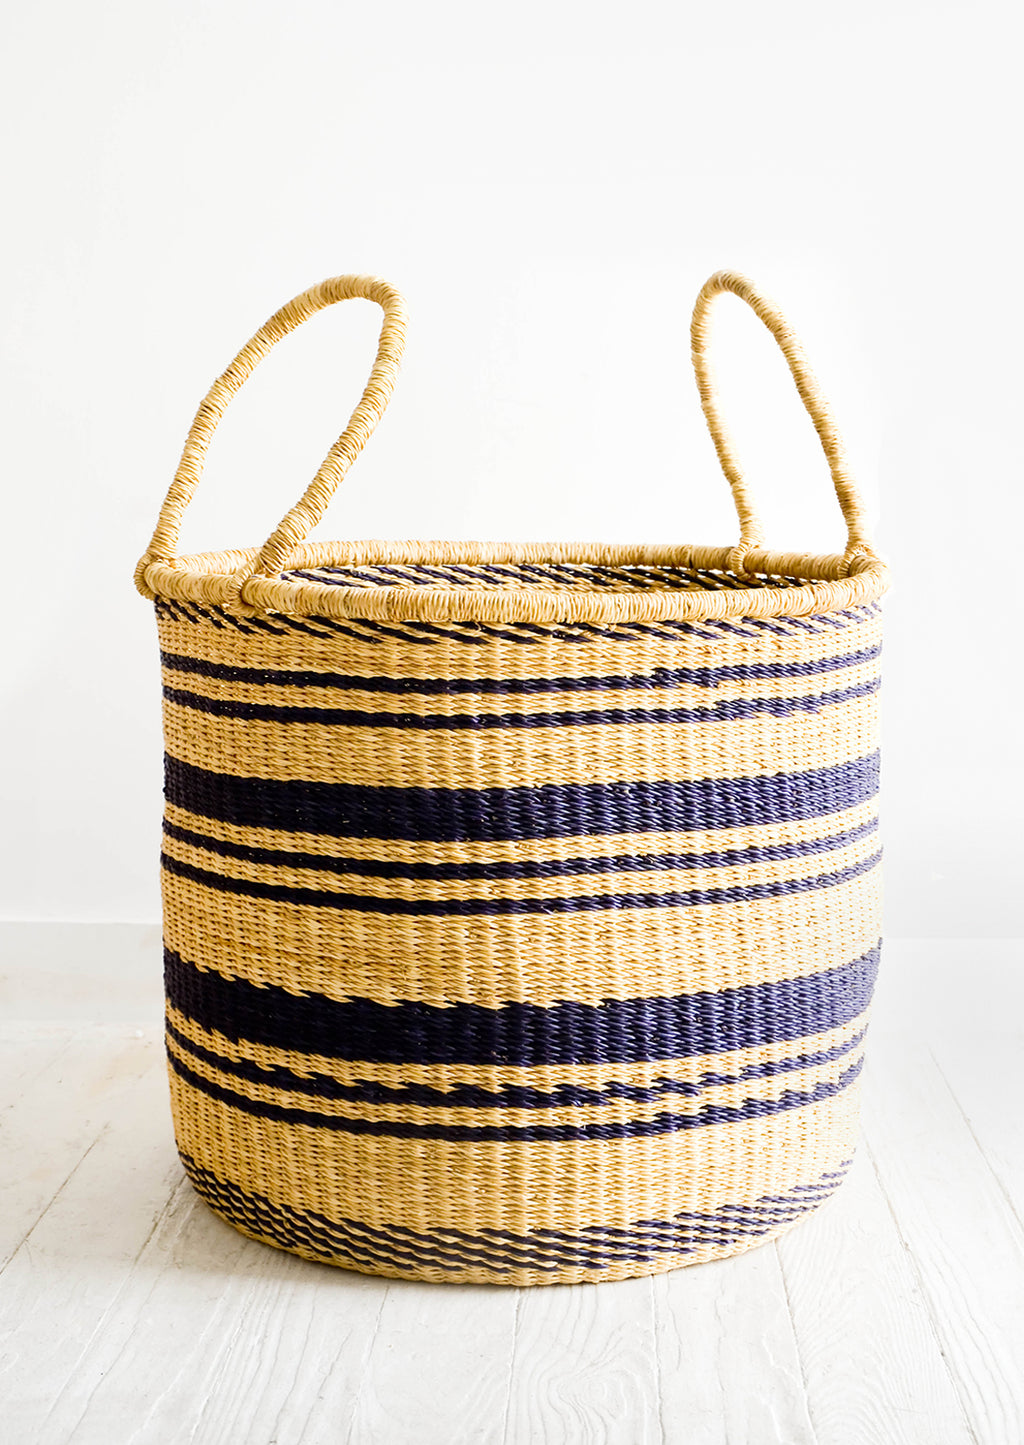 Large: Round straw storage basket with handles at top and navy blue stripes throughout